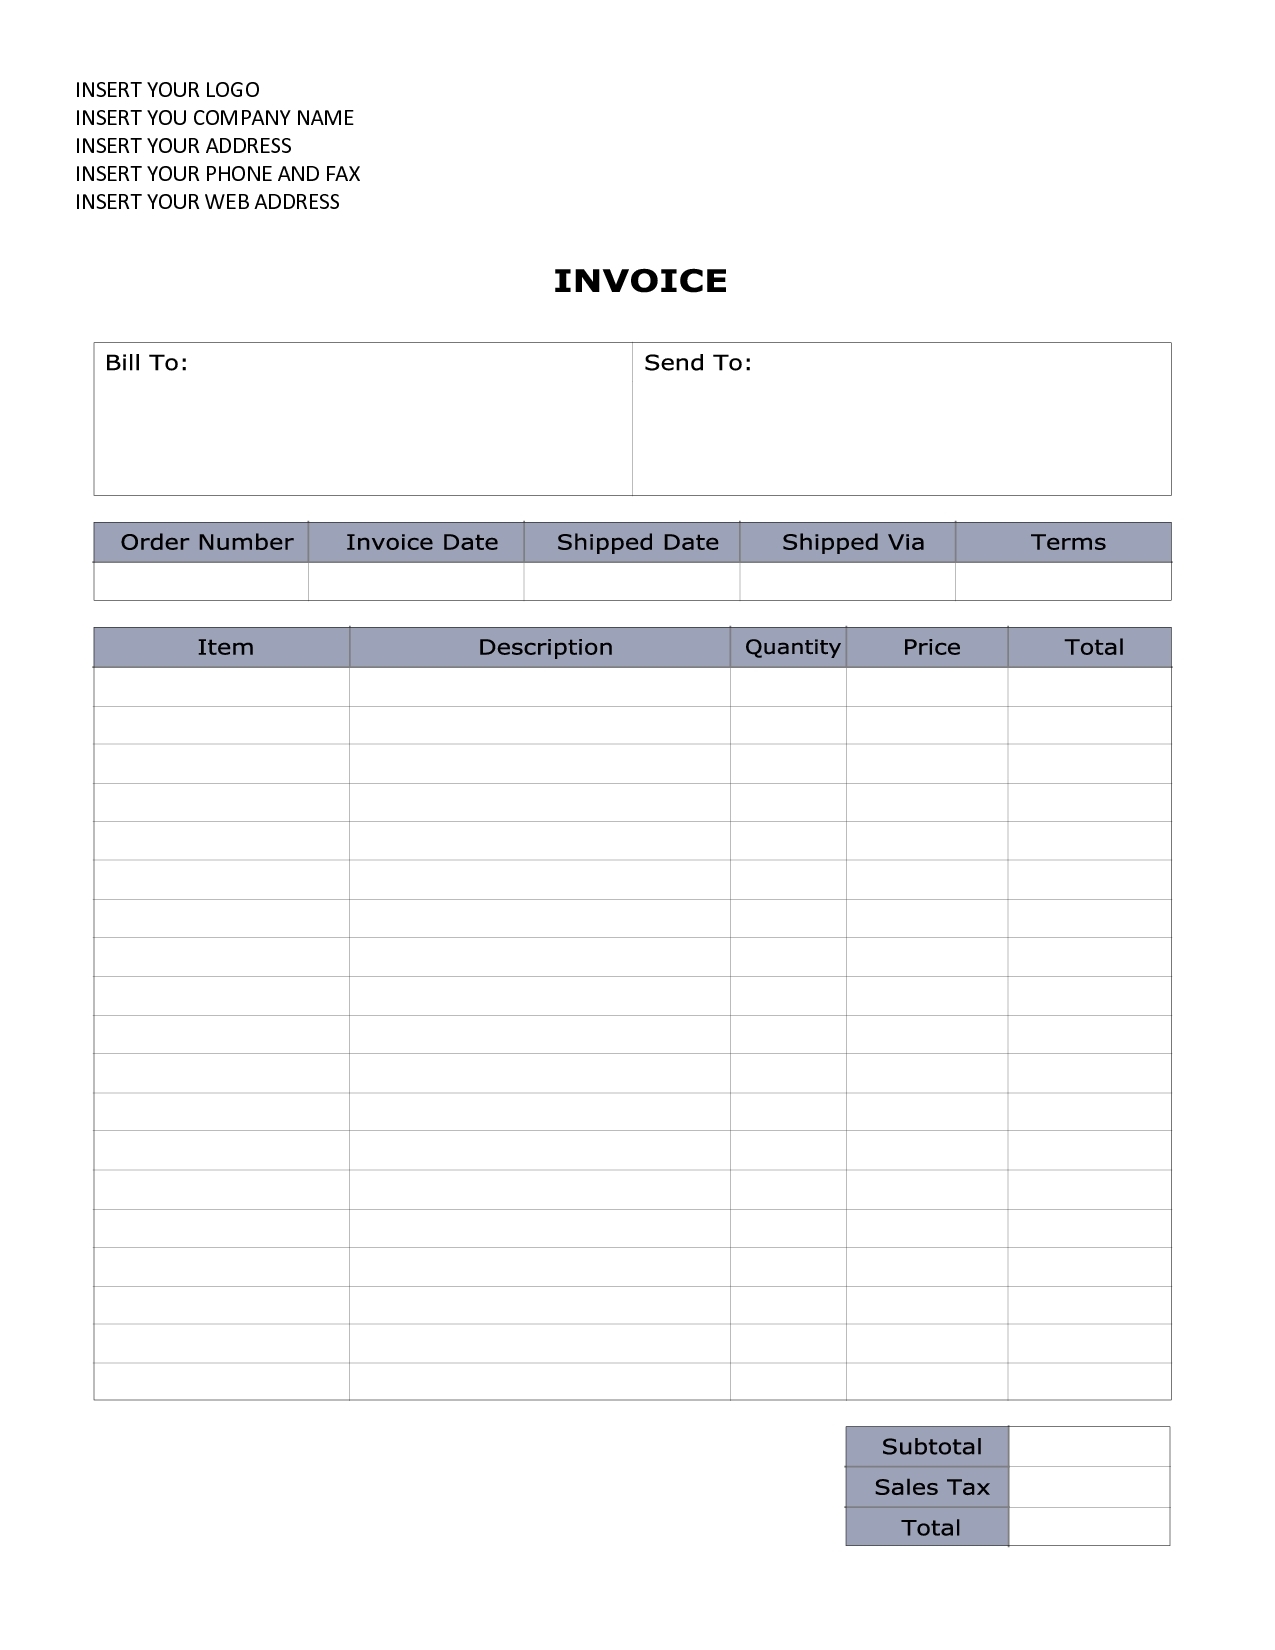 invoice template word invoice template free 2016 invoice format in word format